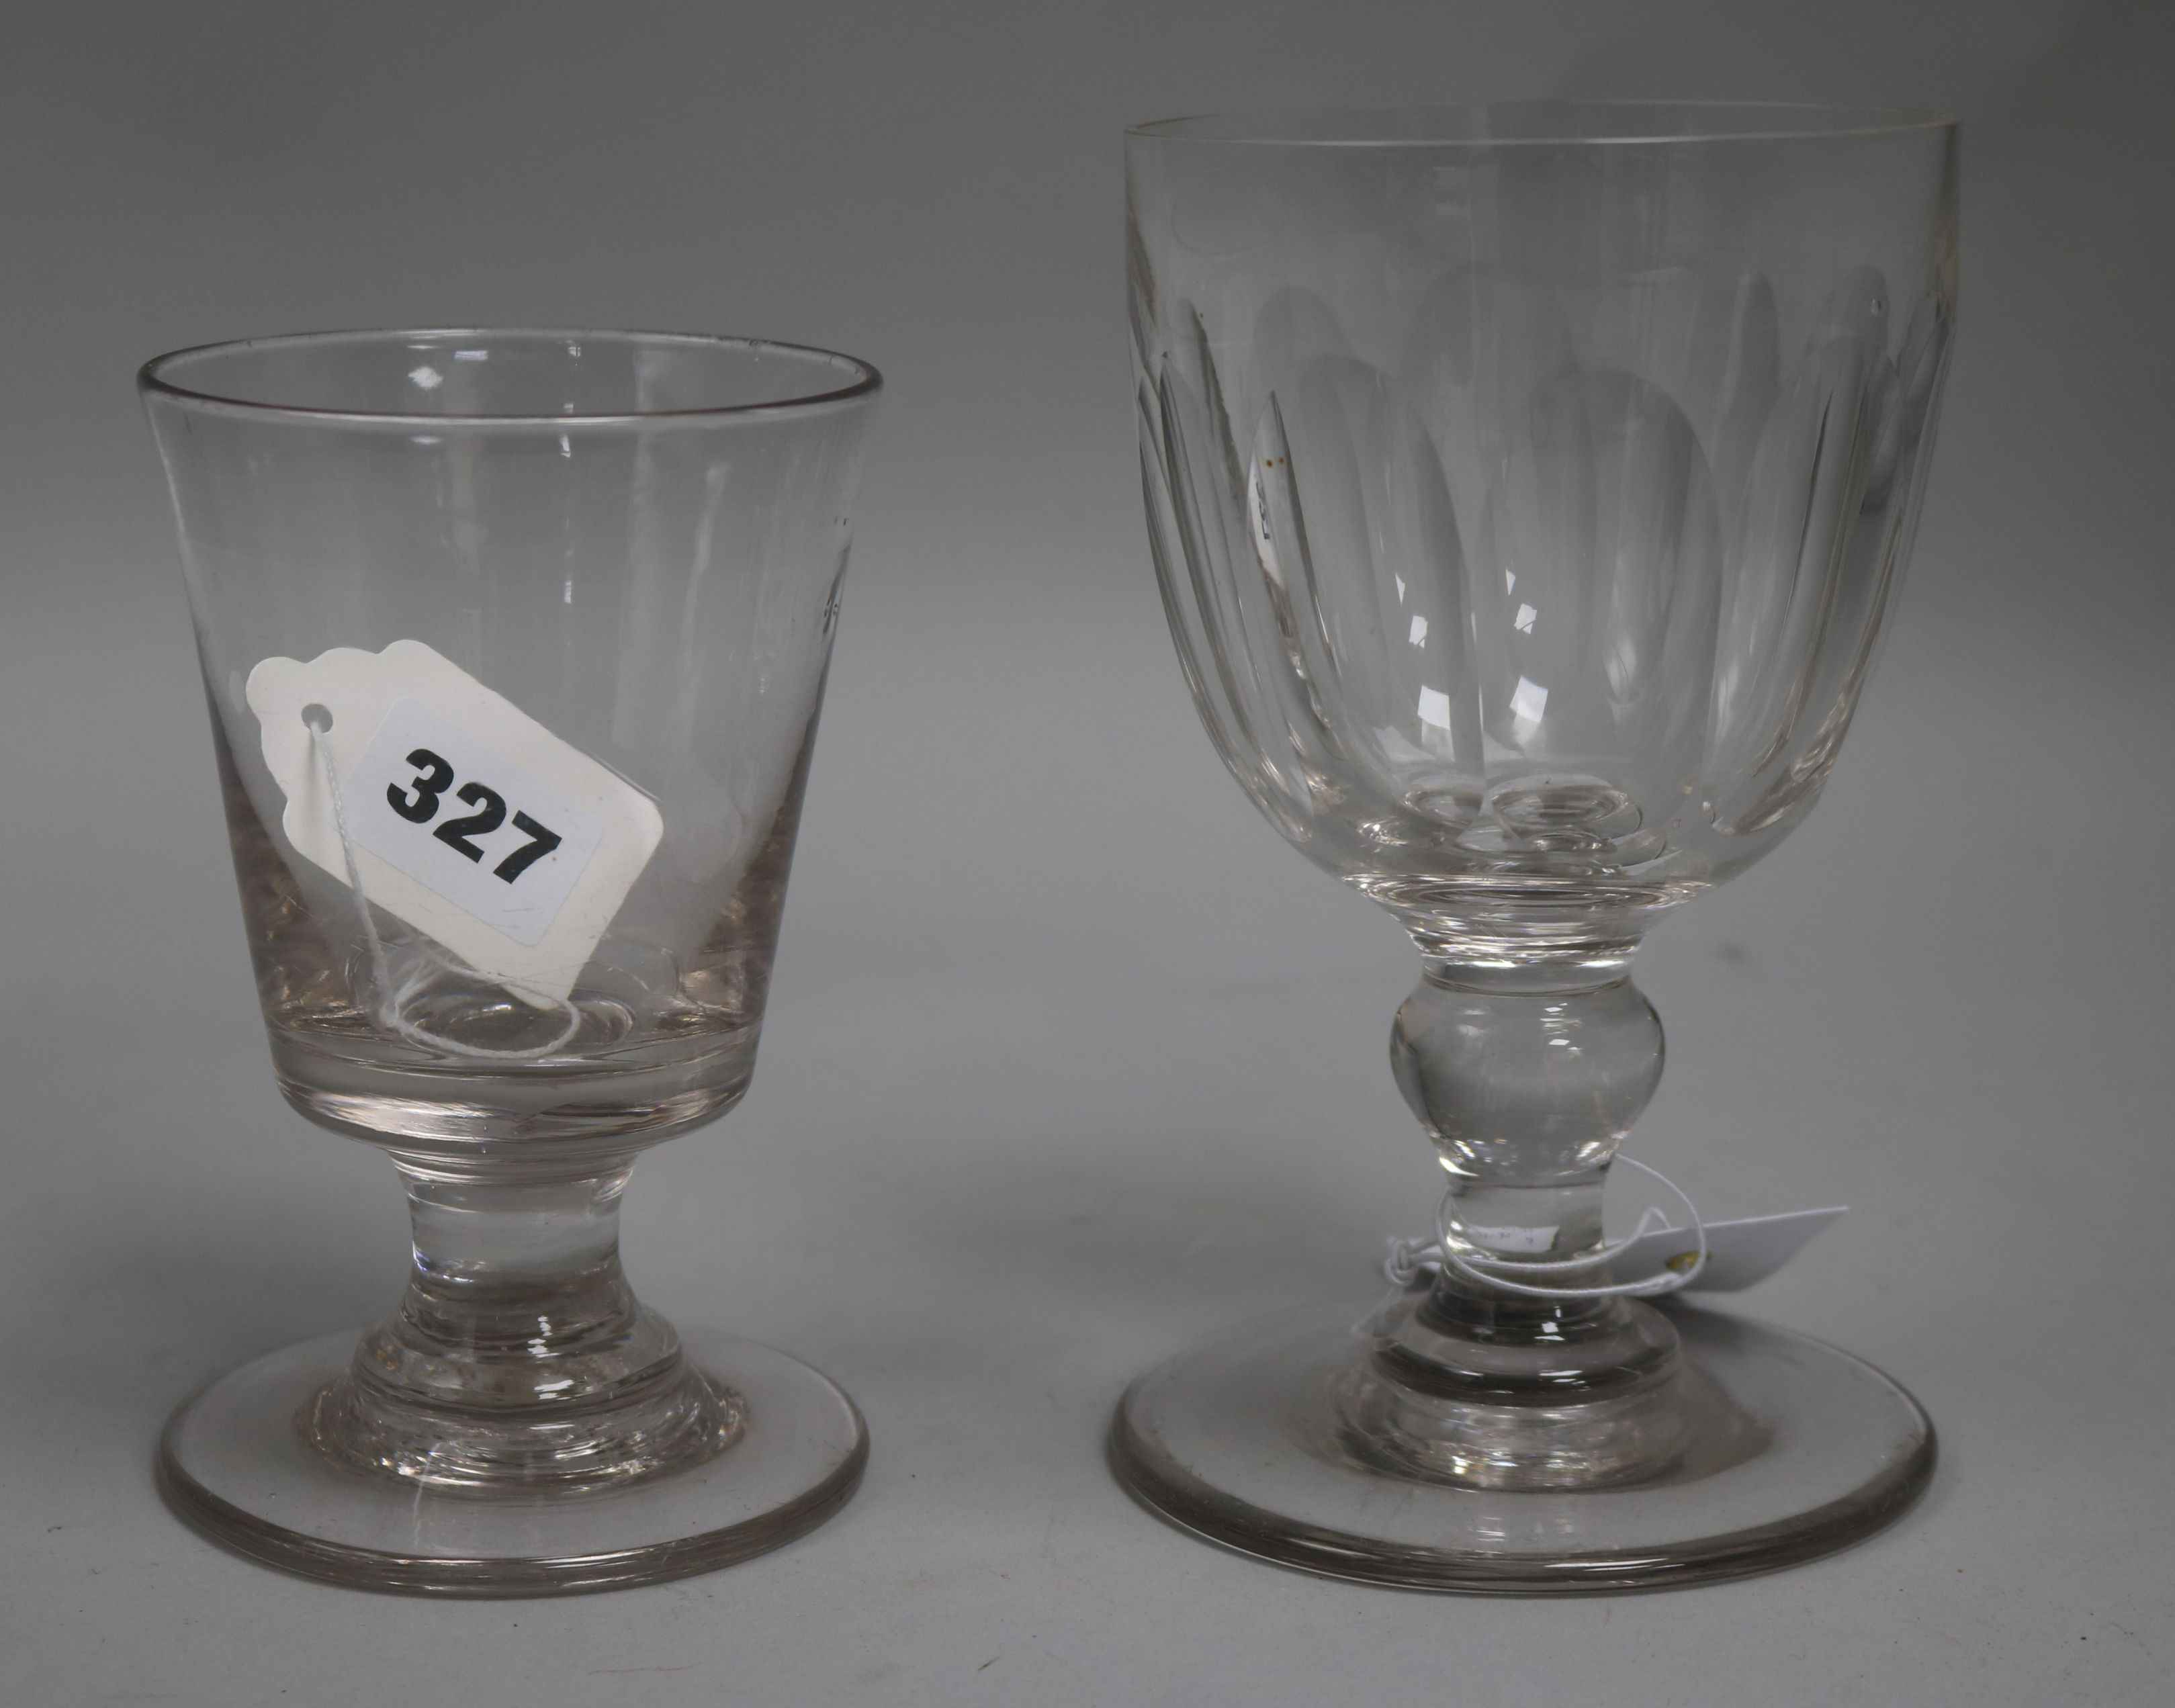 A Regency rummer, with half fluted bowl and an 18th century ale glass with bucket bowl, 6.25in.